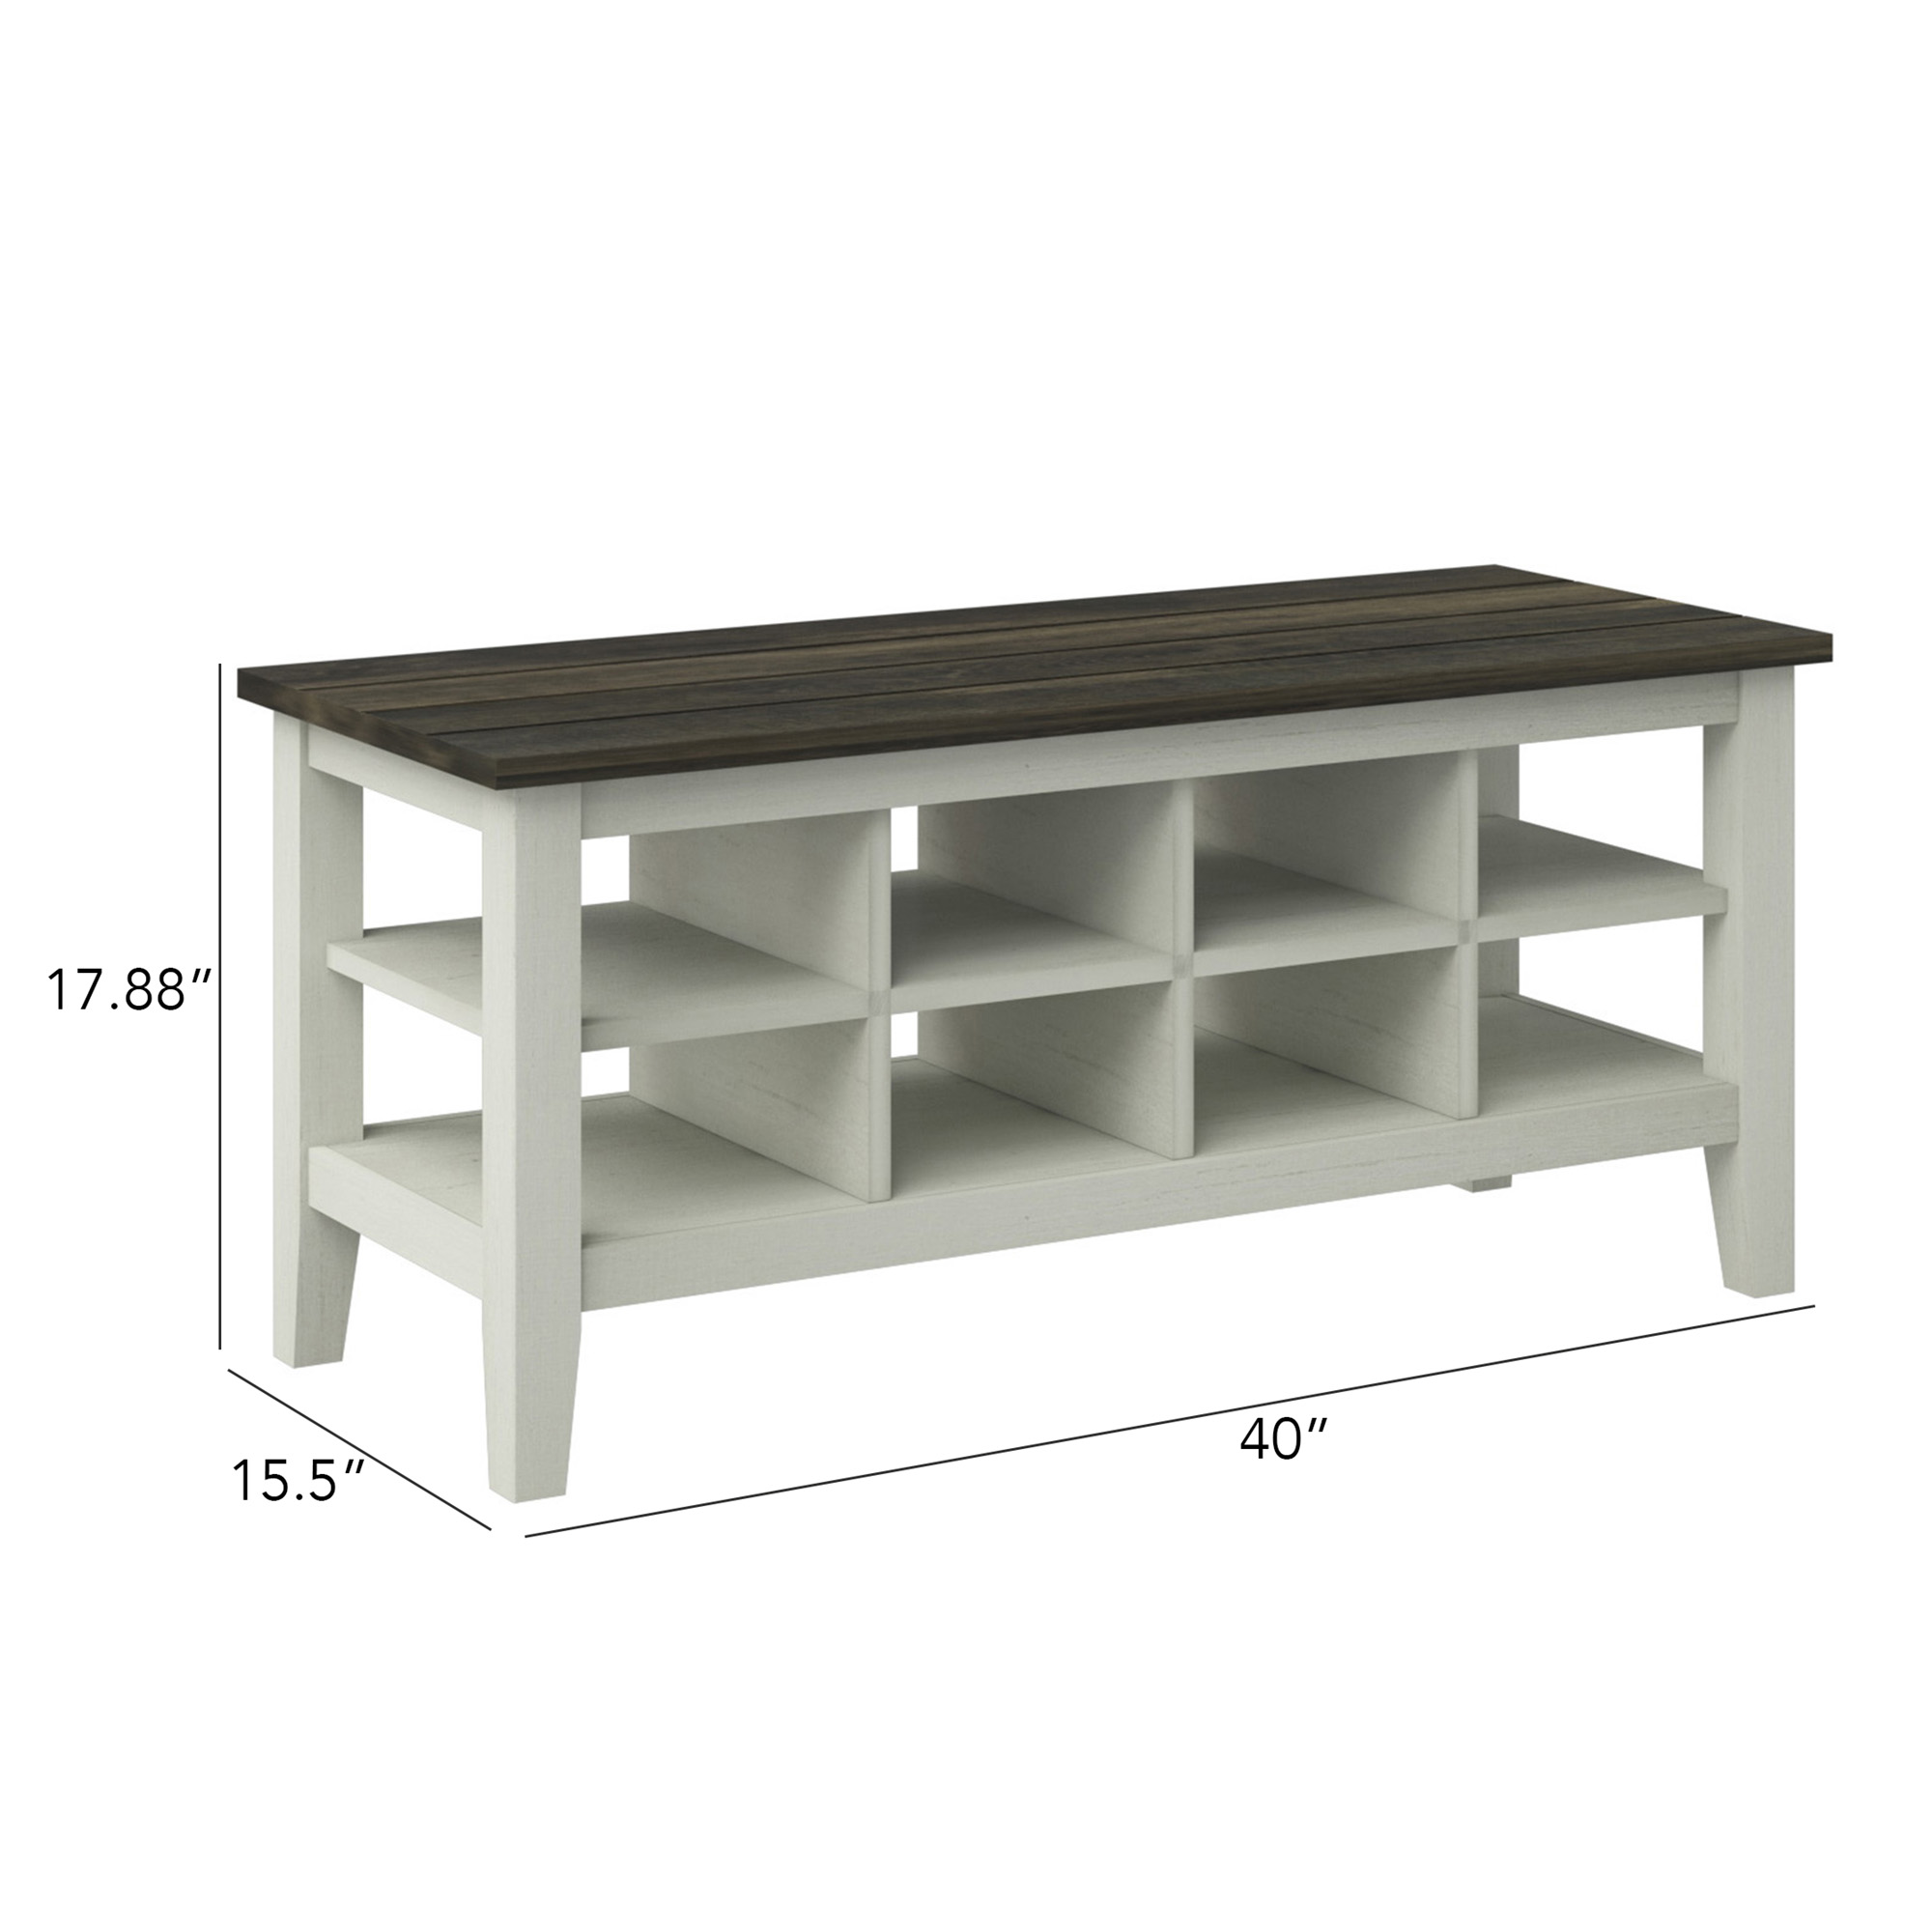 Twin Star Home Two-Tone Storage Bench with Planked Top in Old Wood White, 40”W x 15.5”D x 17.8”H - image 3 of 7